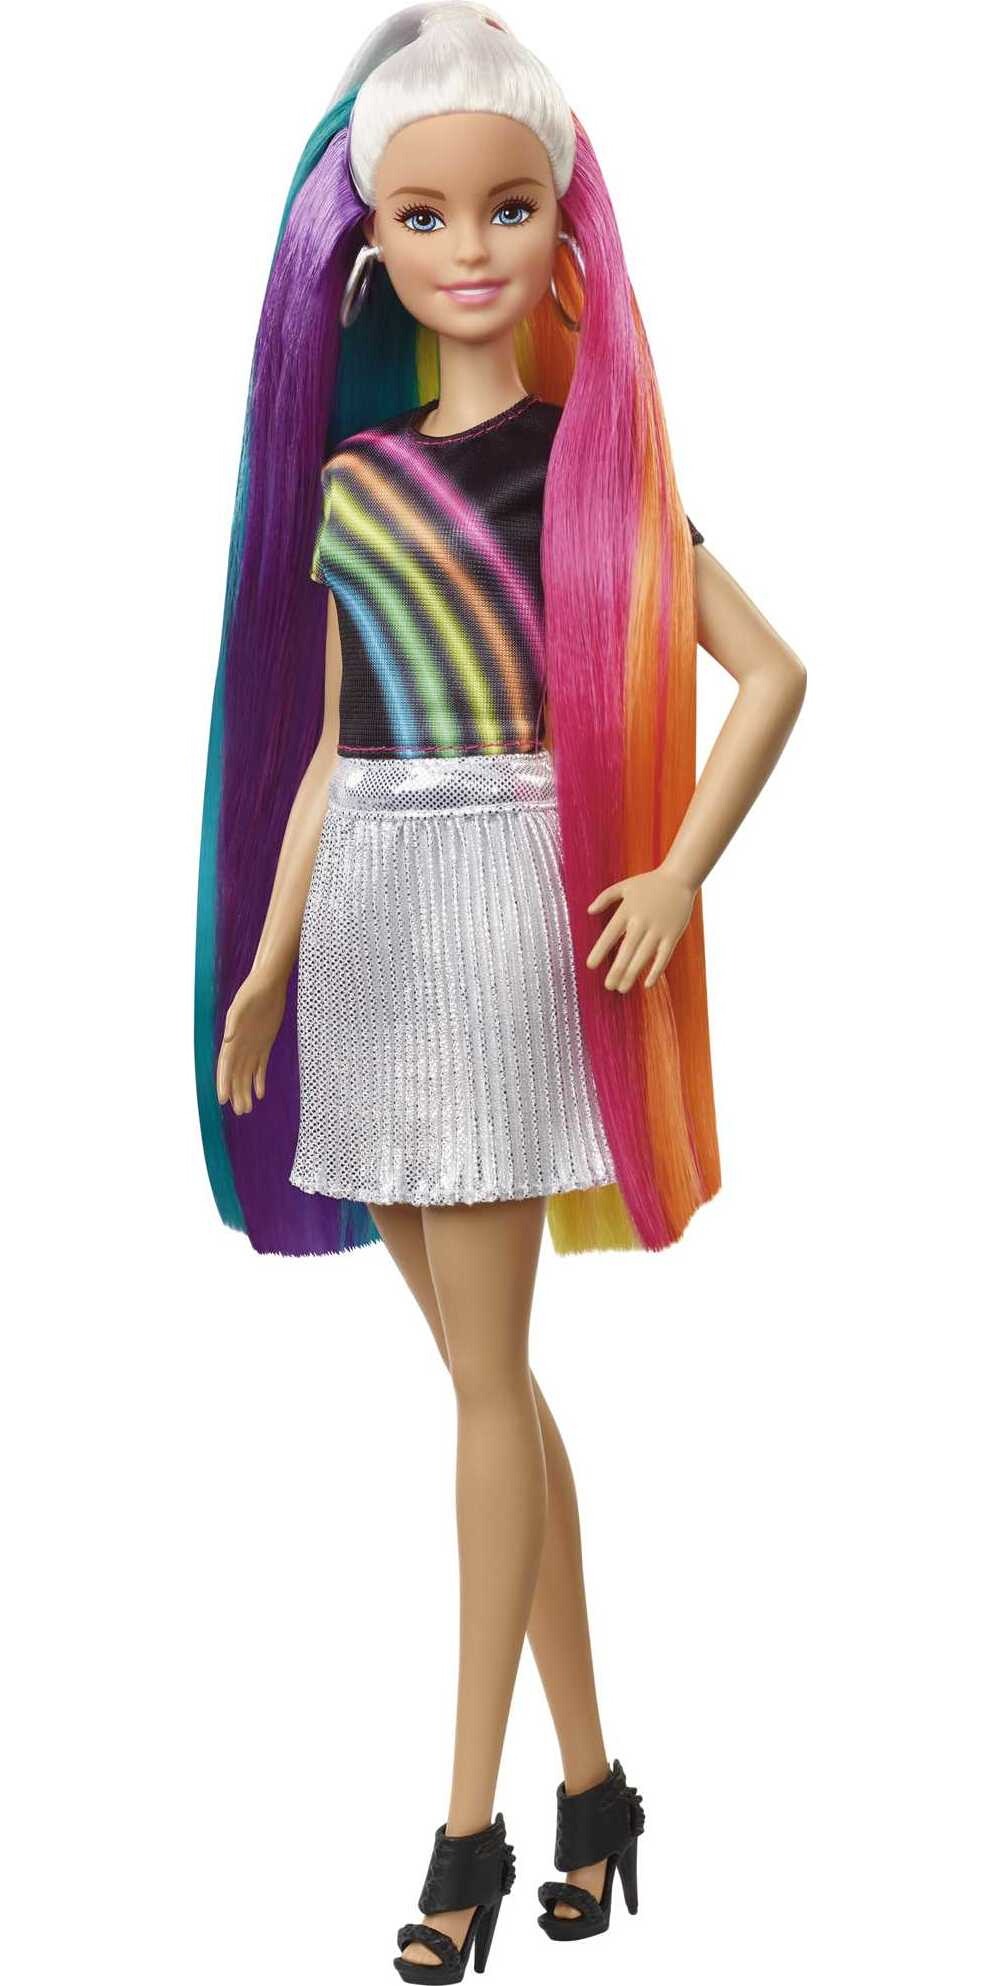 Barbie Rainbow Sparkle Hair Doll, Blonde, with Accessories - image 1 of 7